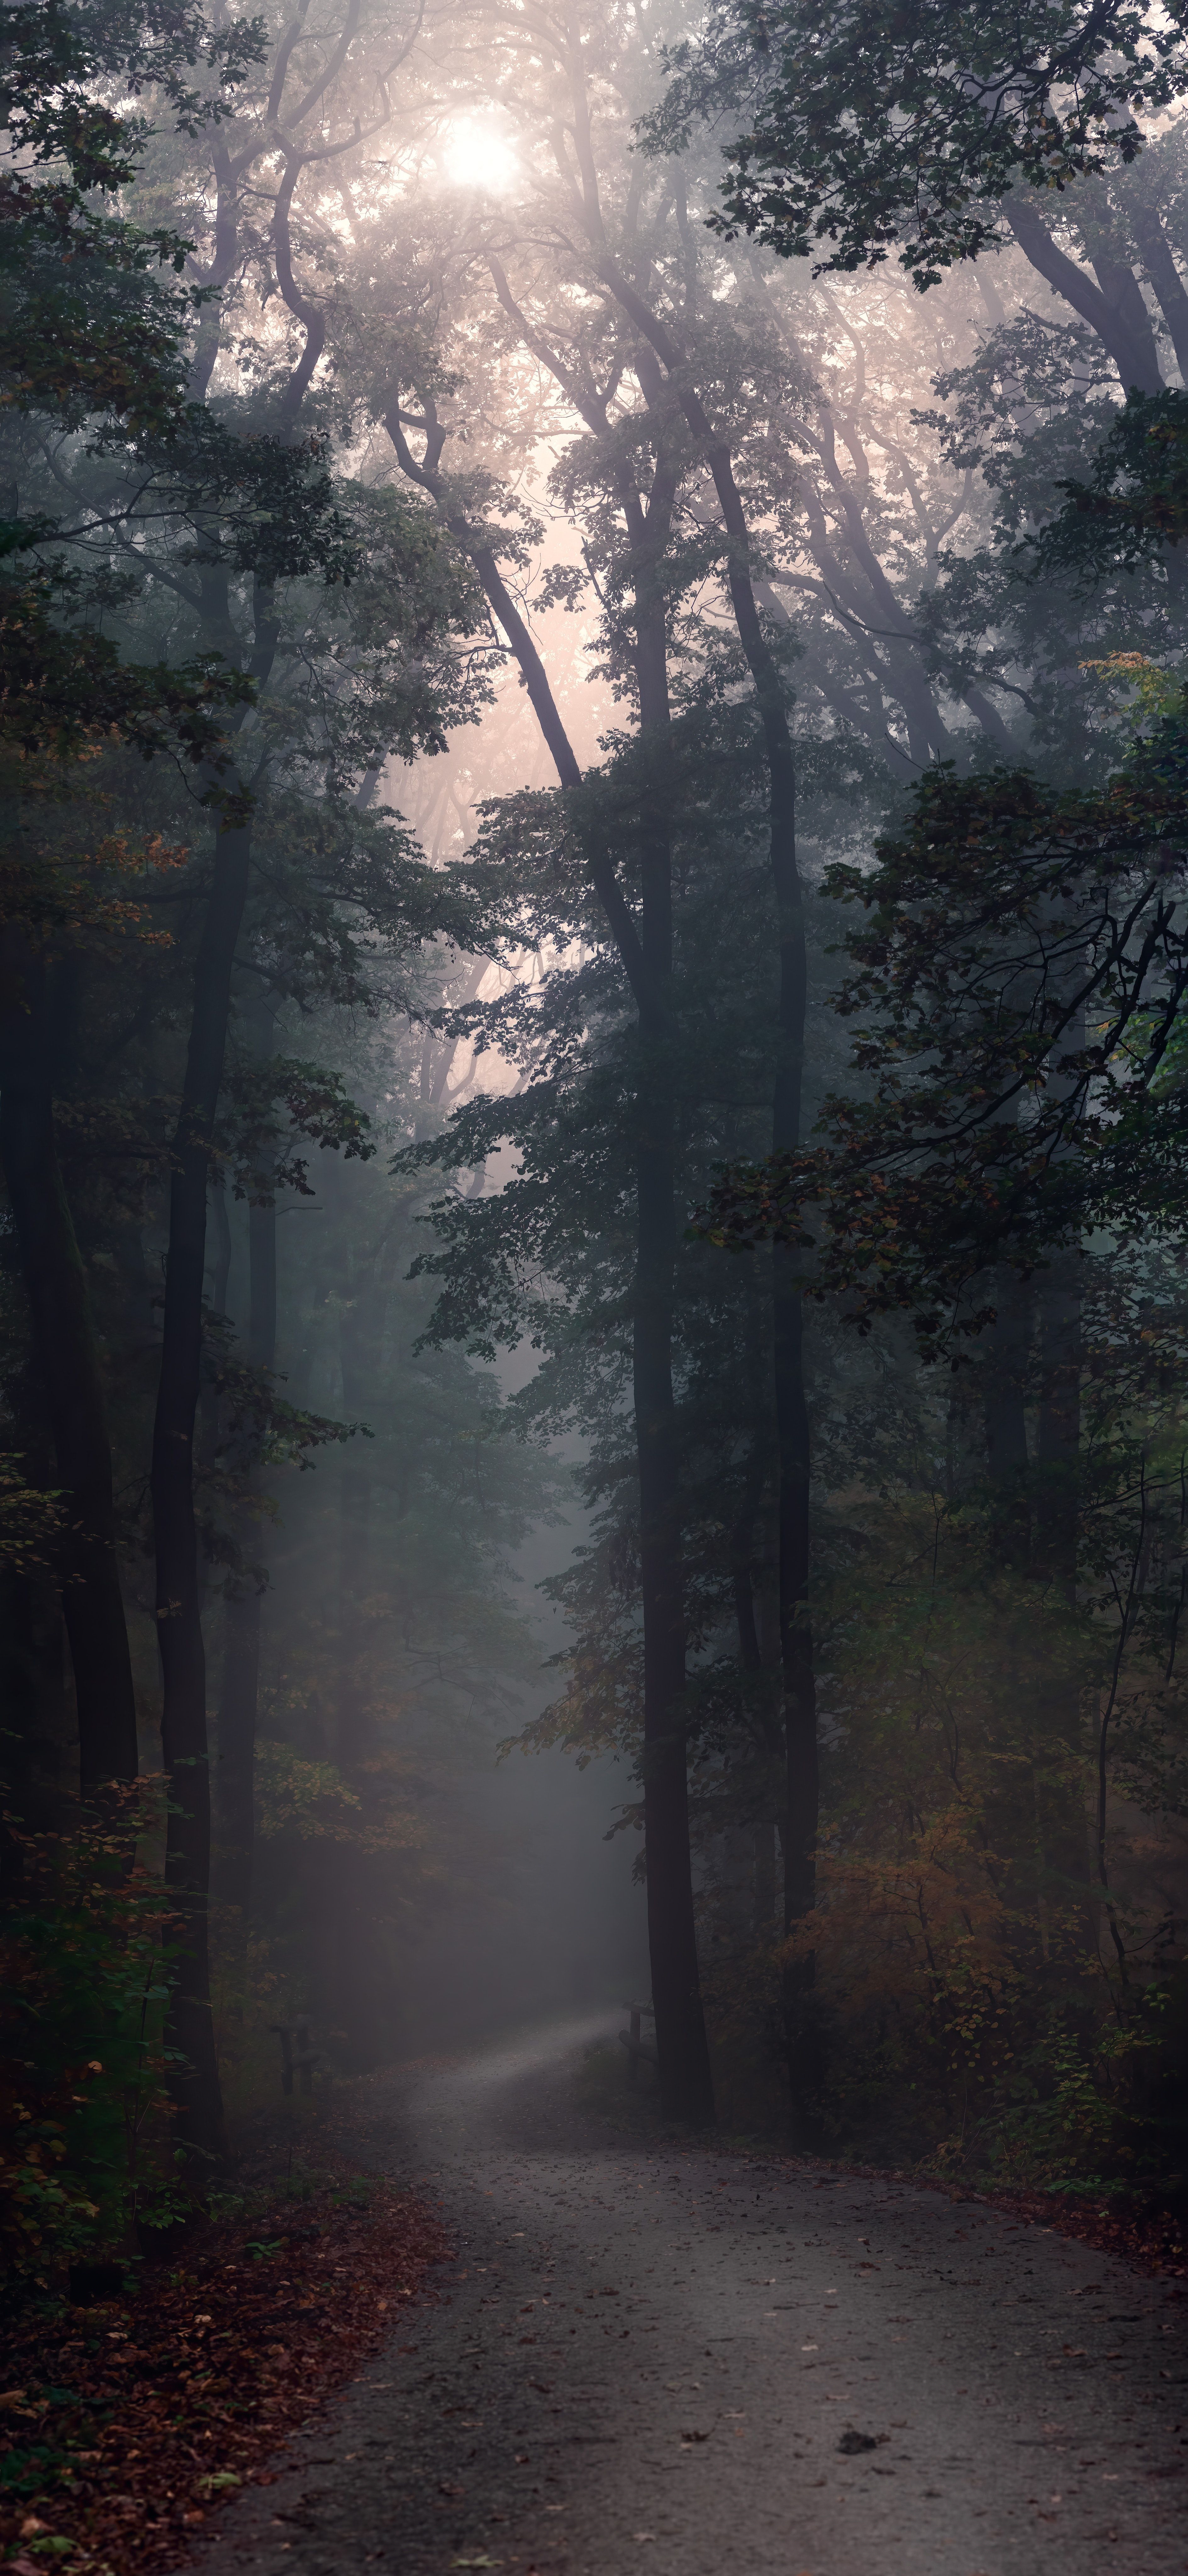 A road that is surrounded by trees - Forest, fog, foggy forest, nature